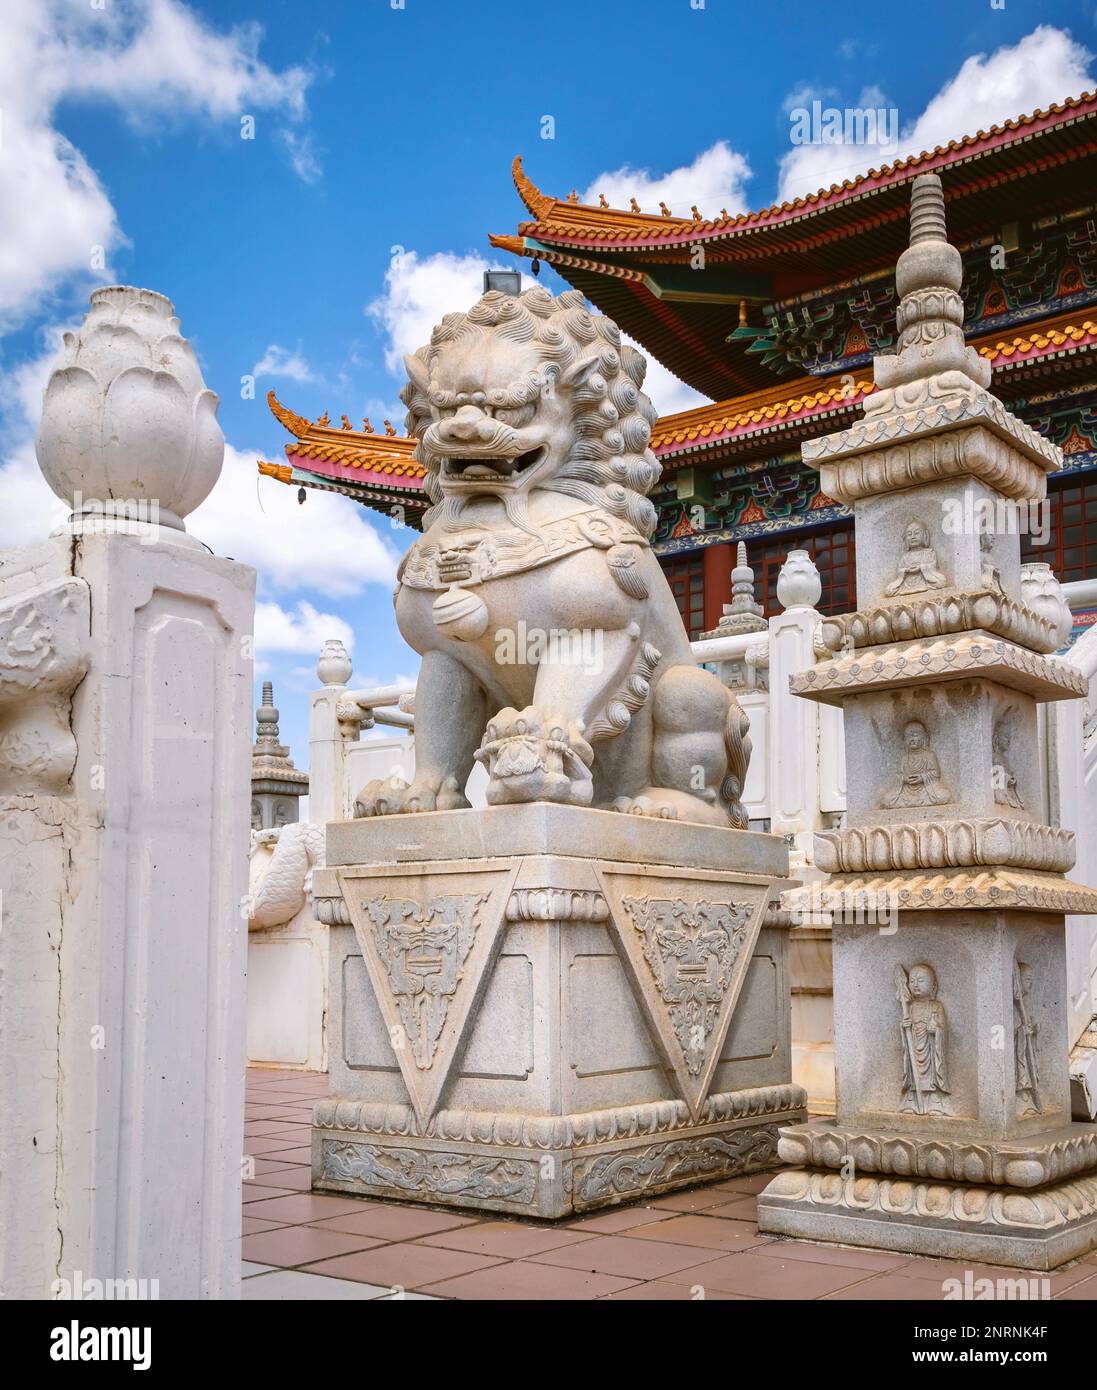 Bronkhorstspruit, South Africa, 26th February - 2023: Large stone carving of lion at Africa's largest Buddhist temple. Stock Photo